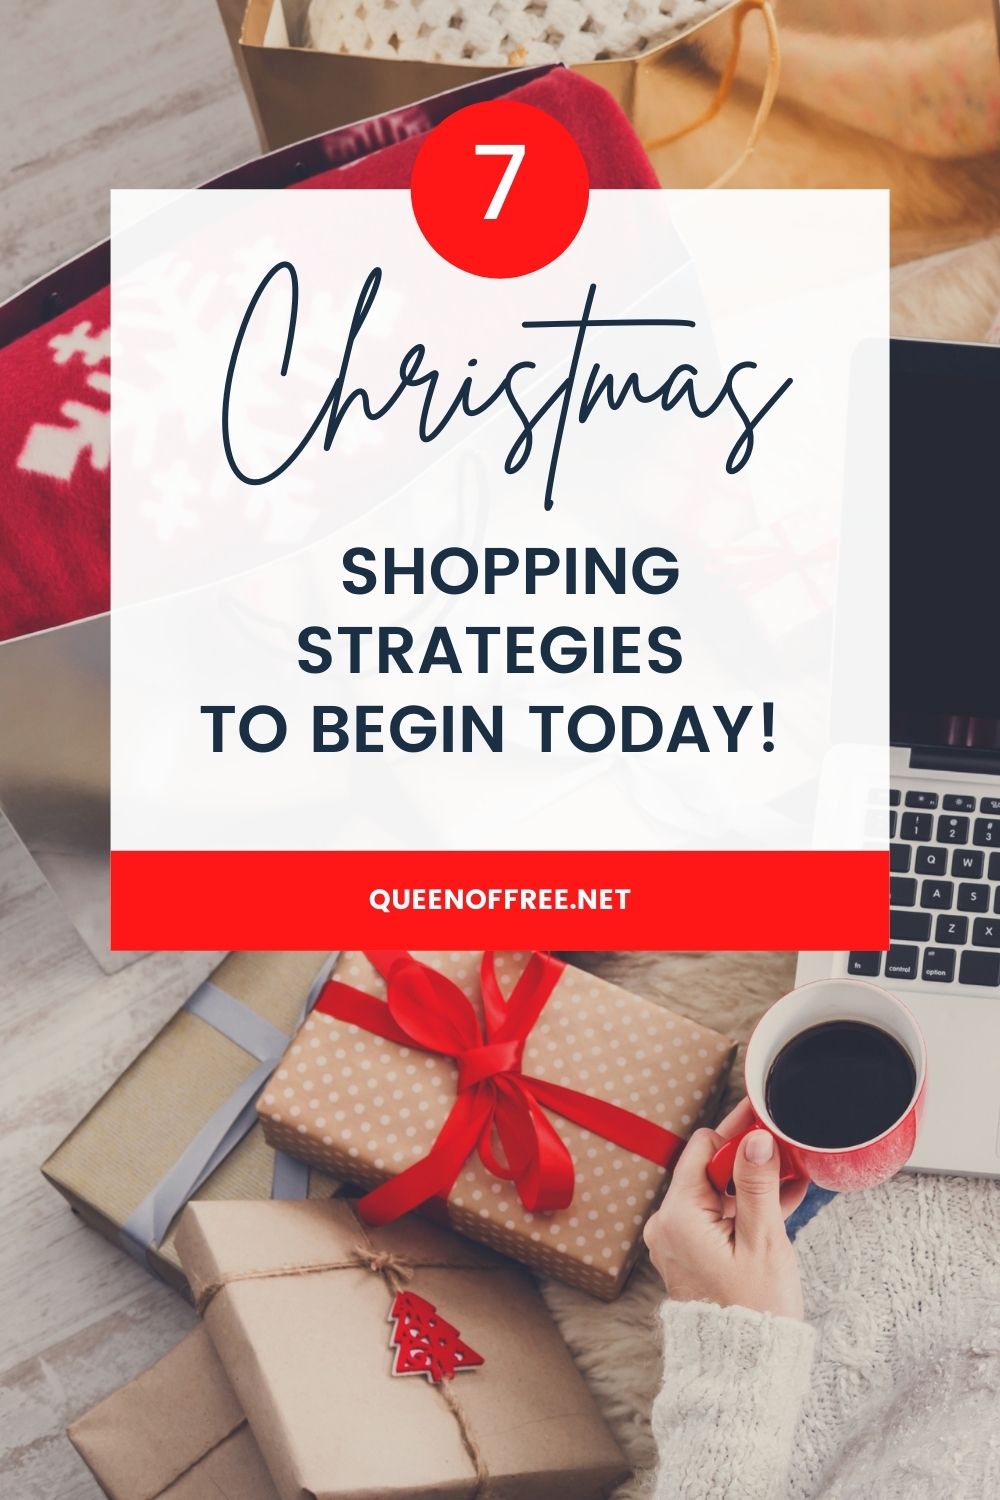 It's a year you need to begin shopping early! These 2021 Christmas Shopping strategies will help navigate shipping, price increases, & more.